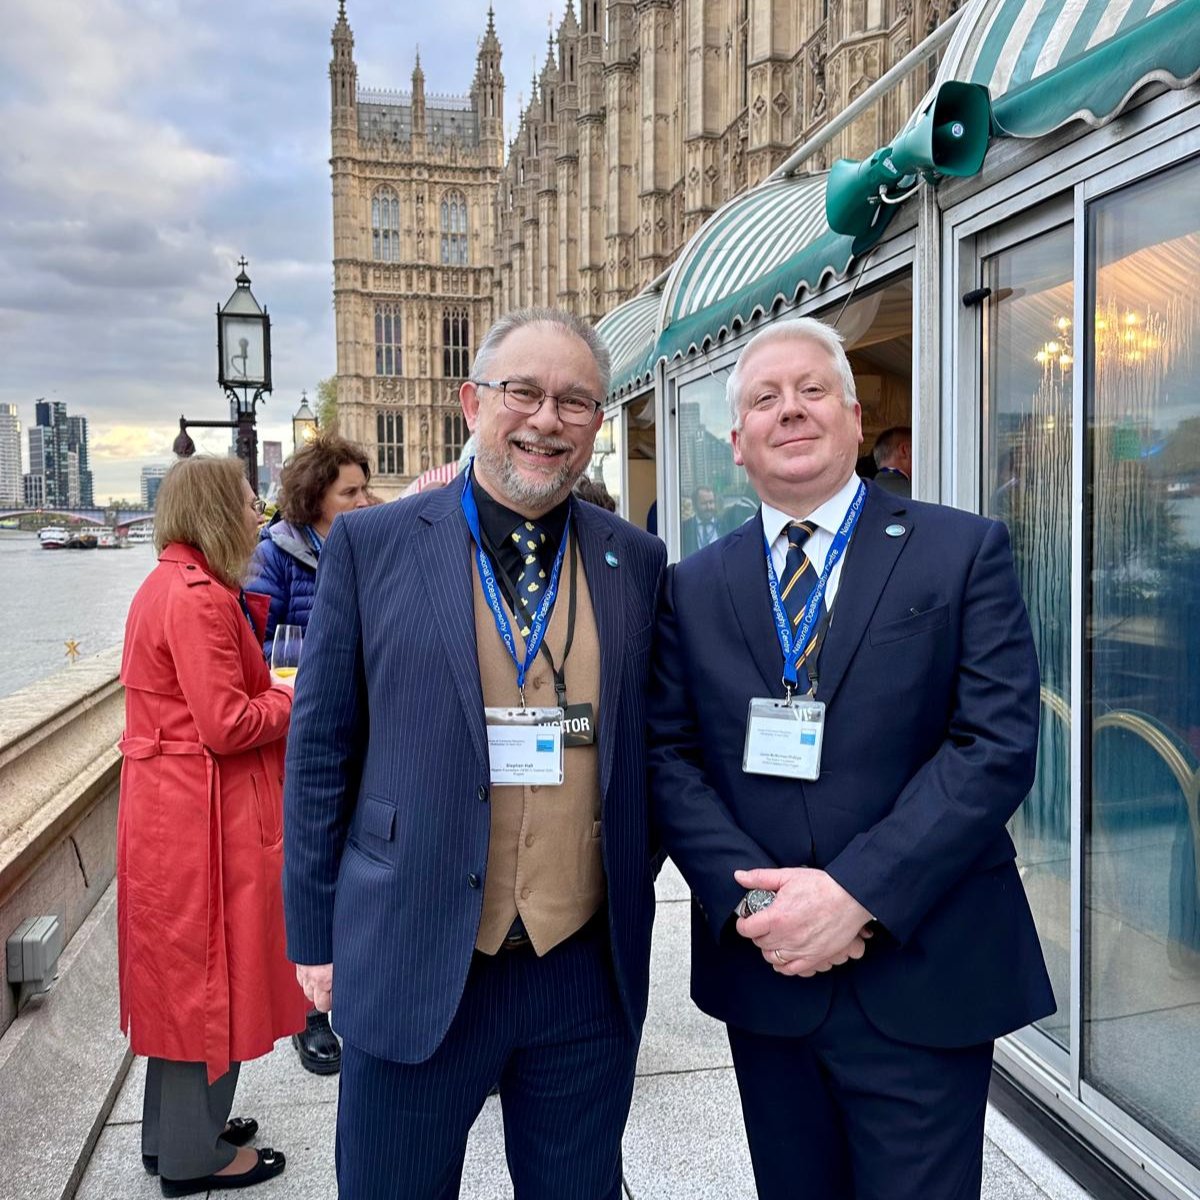 🌊 Pleased to share that Seabed 2030 director, @JamieMcMP, and Head of Partnerships, @saltwatersteve, had the privilege of attending an enlightening event at the historic Houses of Parliament in #London yesterday.